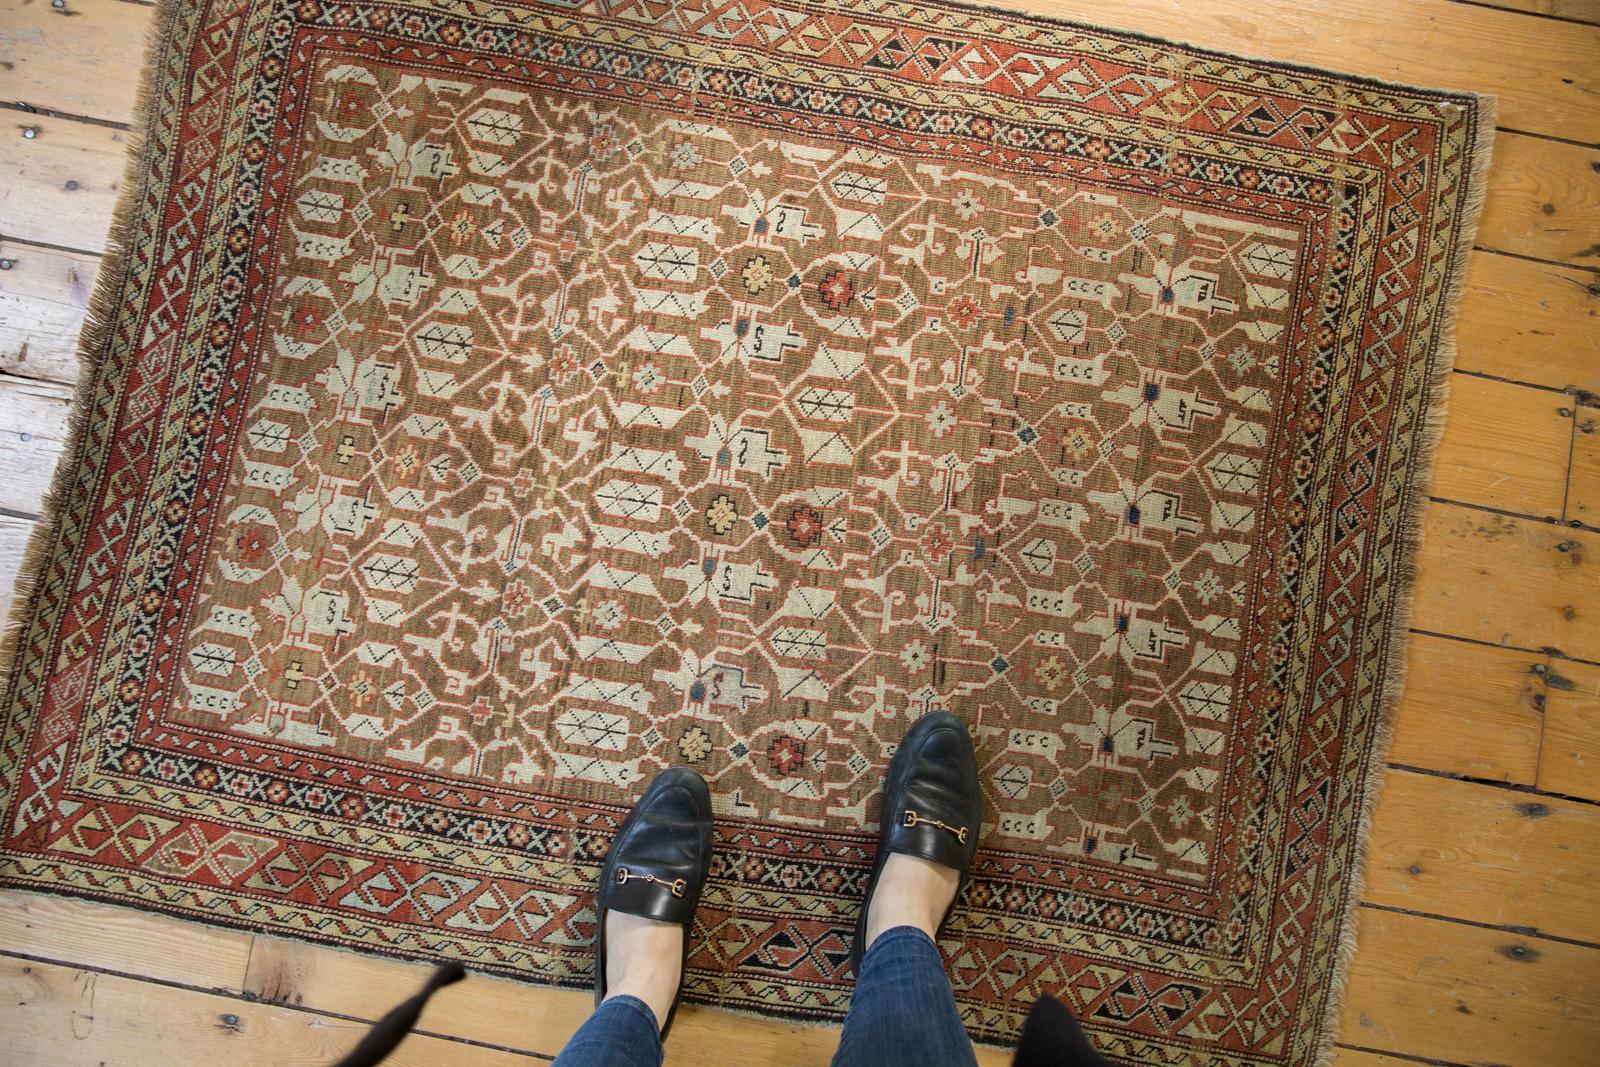 Handsome, delicate and intricate antique Caucasian rug circa 1910. Gorgeous antique Lotto inspired design with excellent character and execution. Many years of enjoyment to come with this rug! Recently professionally cleaned, ready for in-home use.